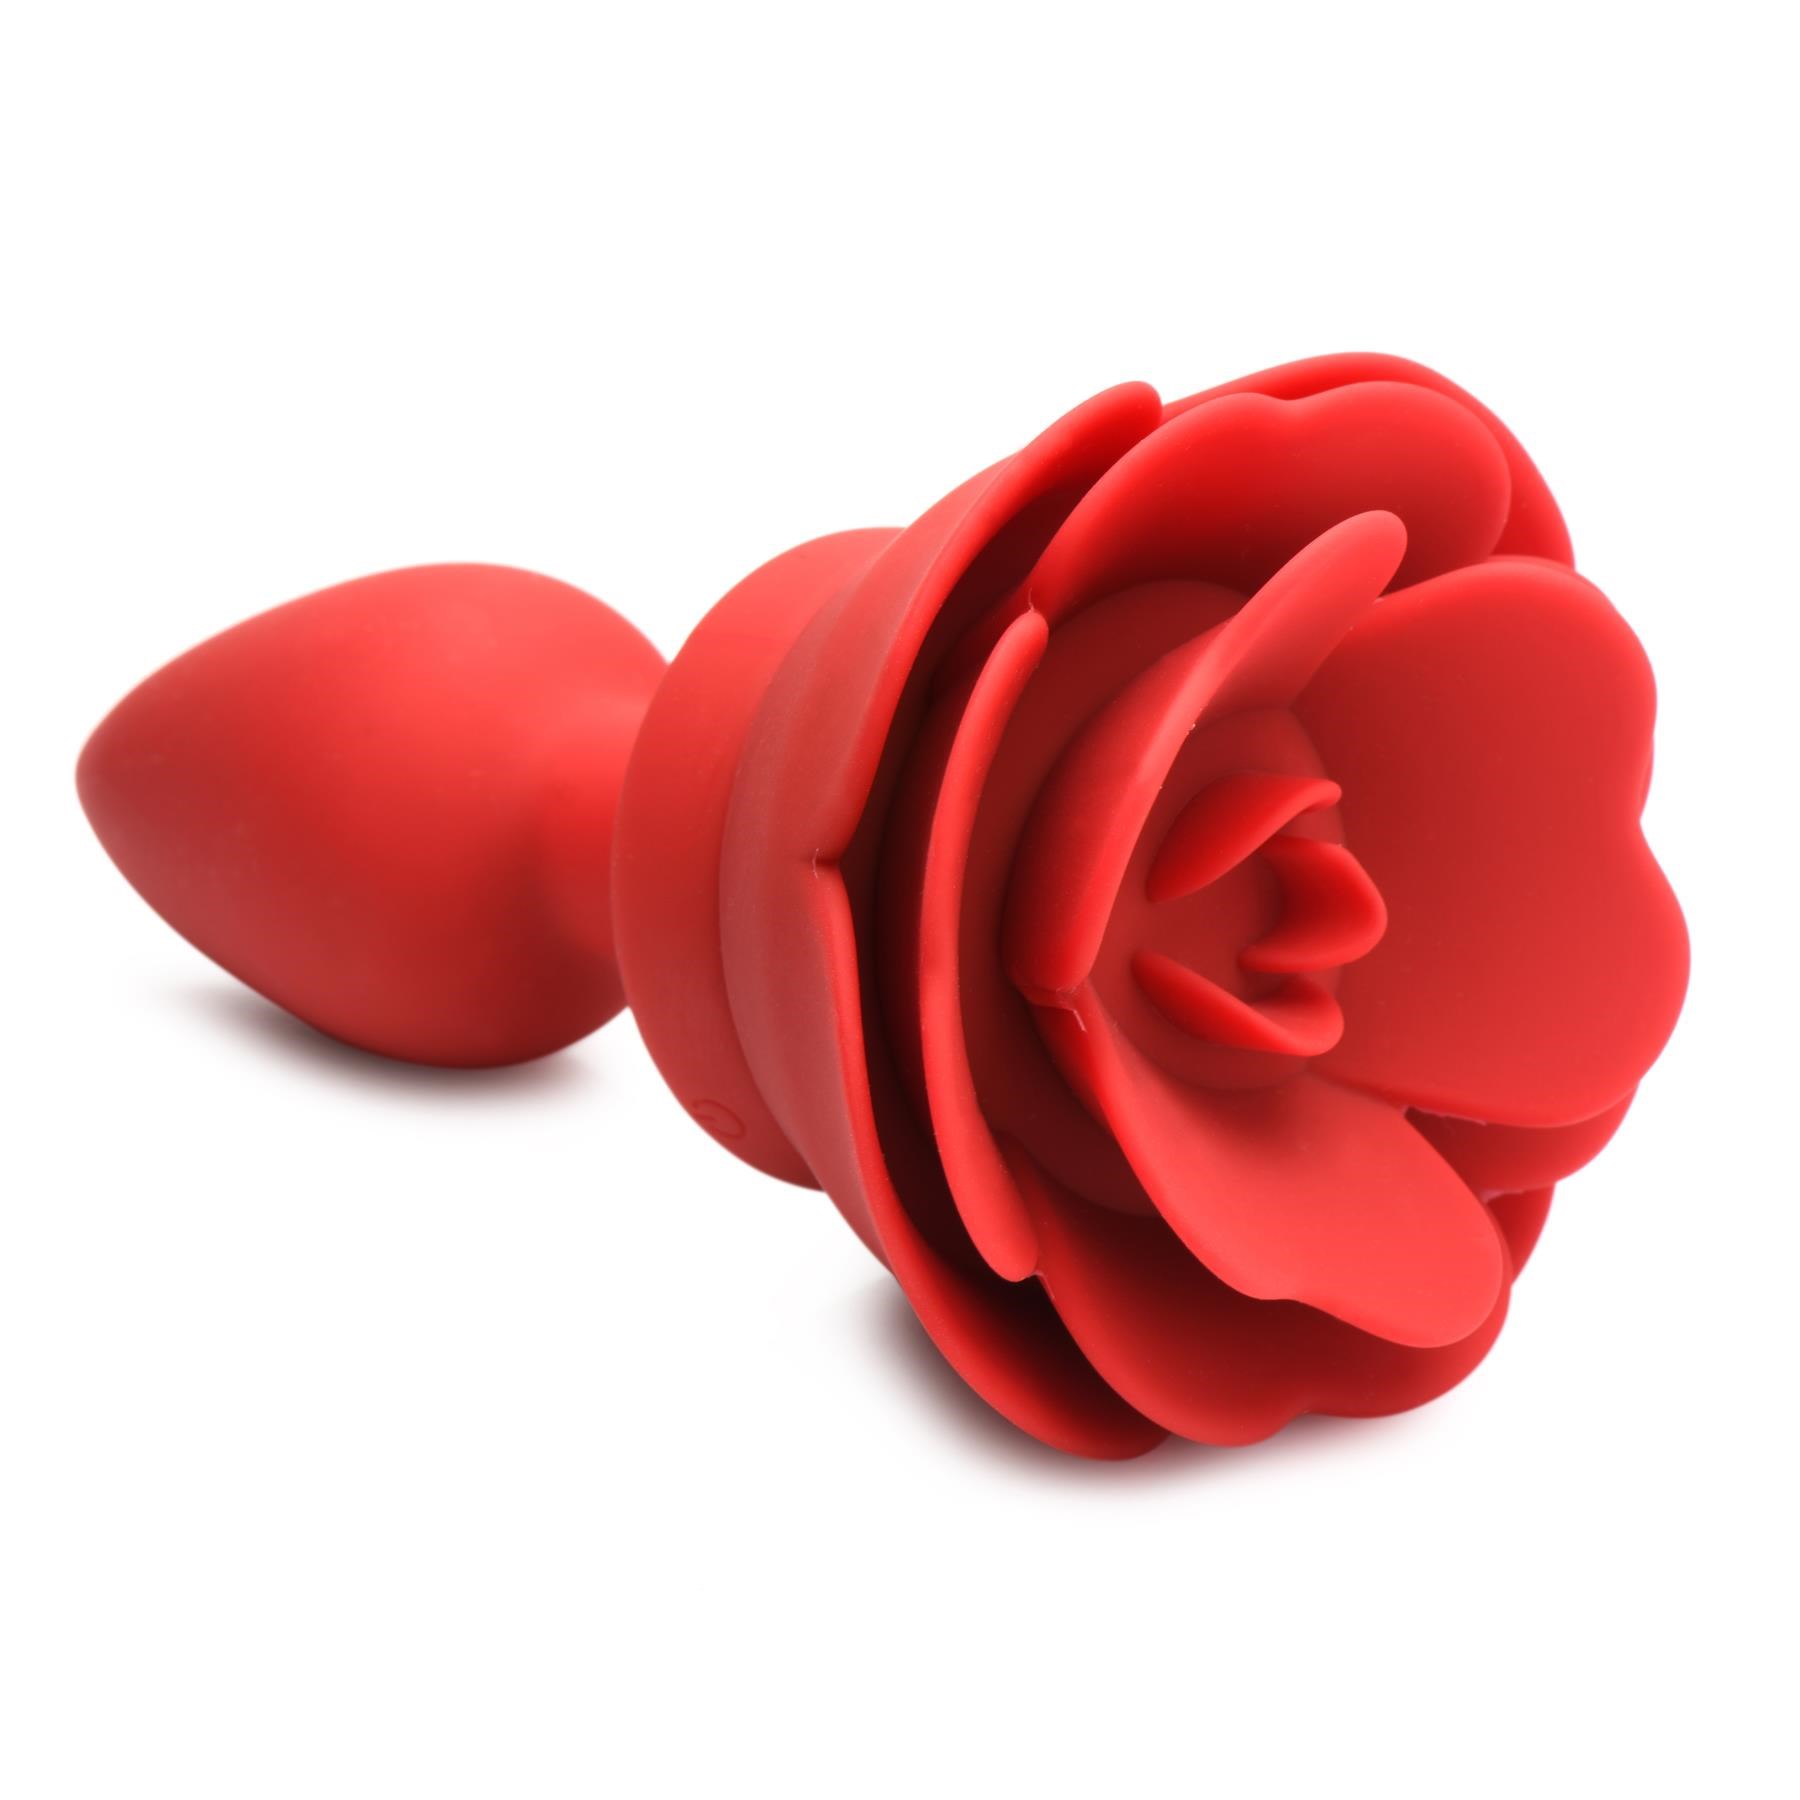 Booty Sparks Vibrating Rose Anal Plug with Remote Control - Product Shot #3